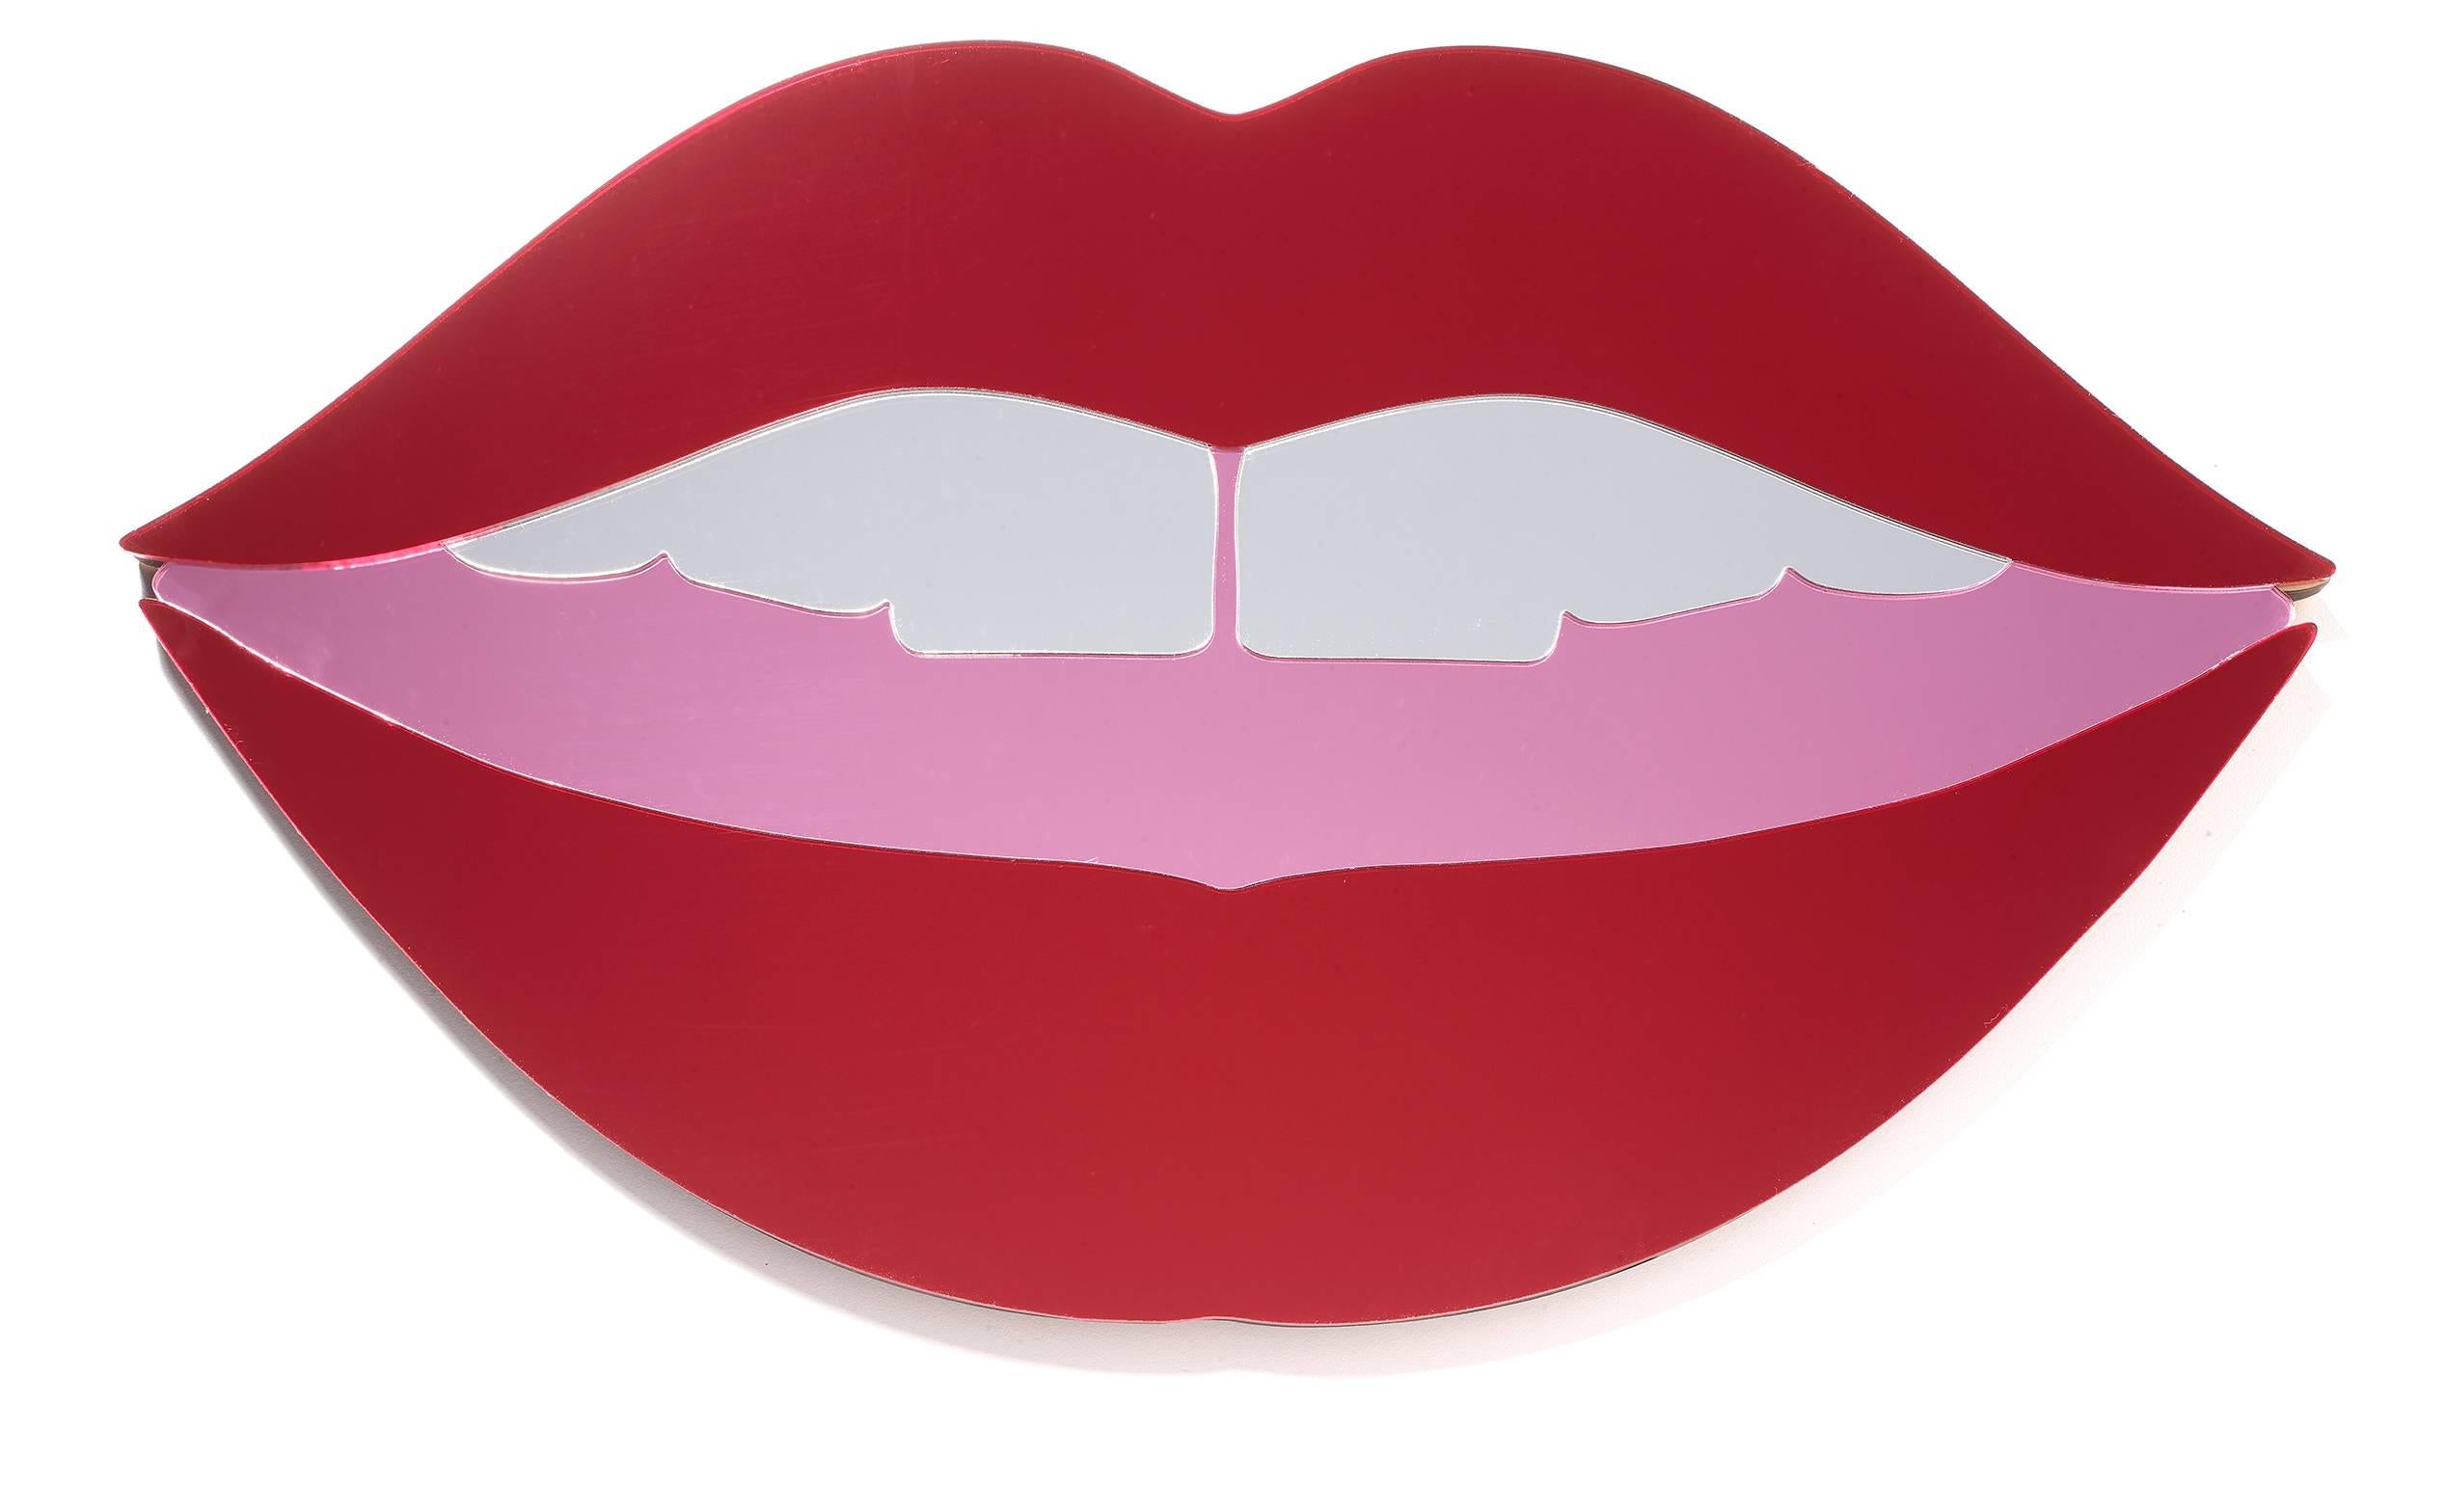 Red Lip Wall Mirror in Perspex with Wood Backing by Bride & Wolfe

Designed by Bride & Wolfe
Contemporary, Australia, 2015
Perspex (acrylic) mirror with wood backing
H 9 in, W 15.25 in, D 0.5 in

Lead time 8-10 weeks if not in stock.